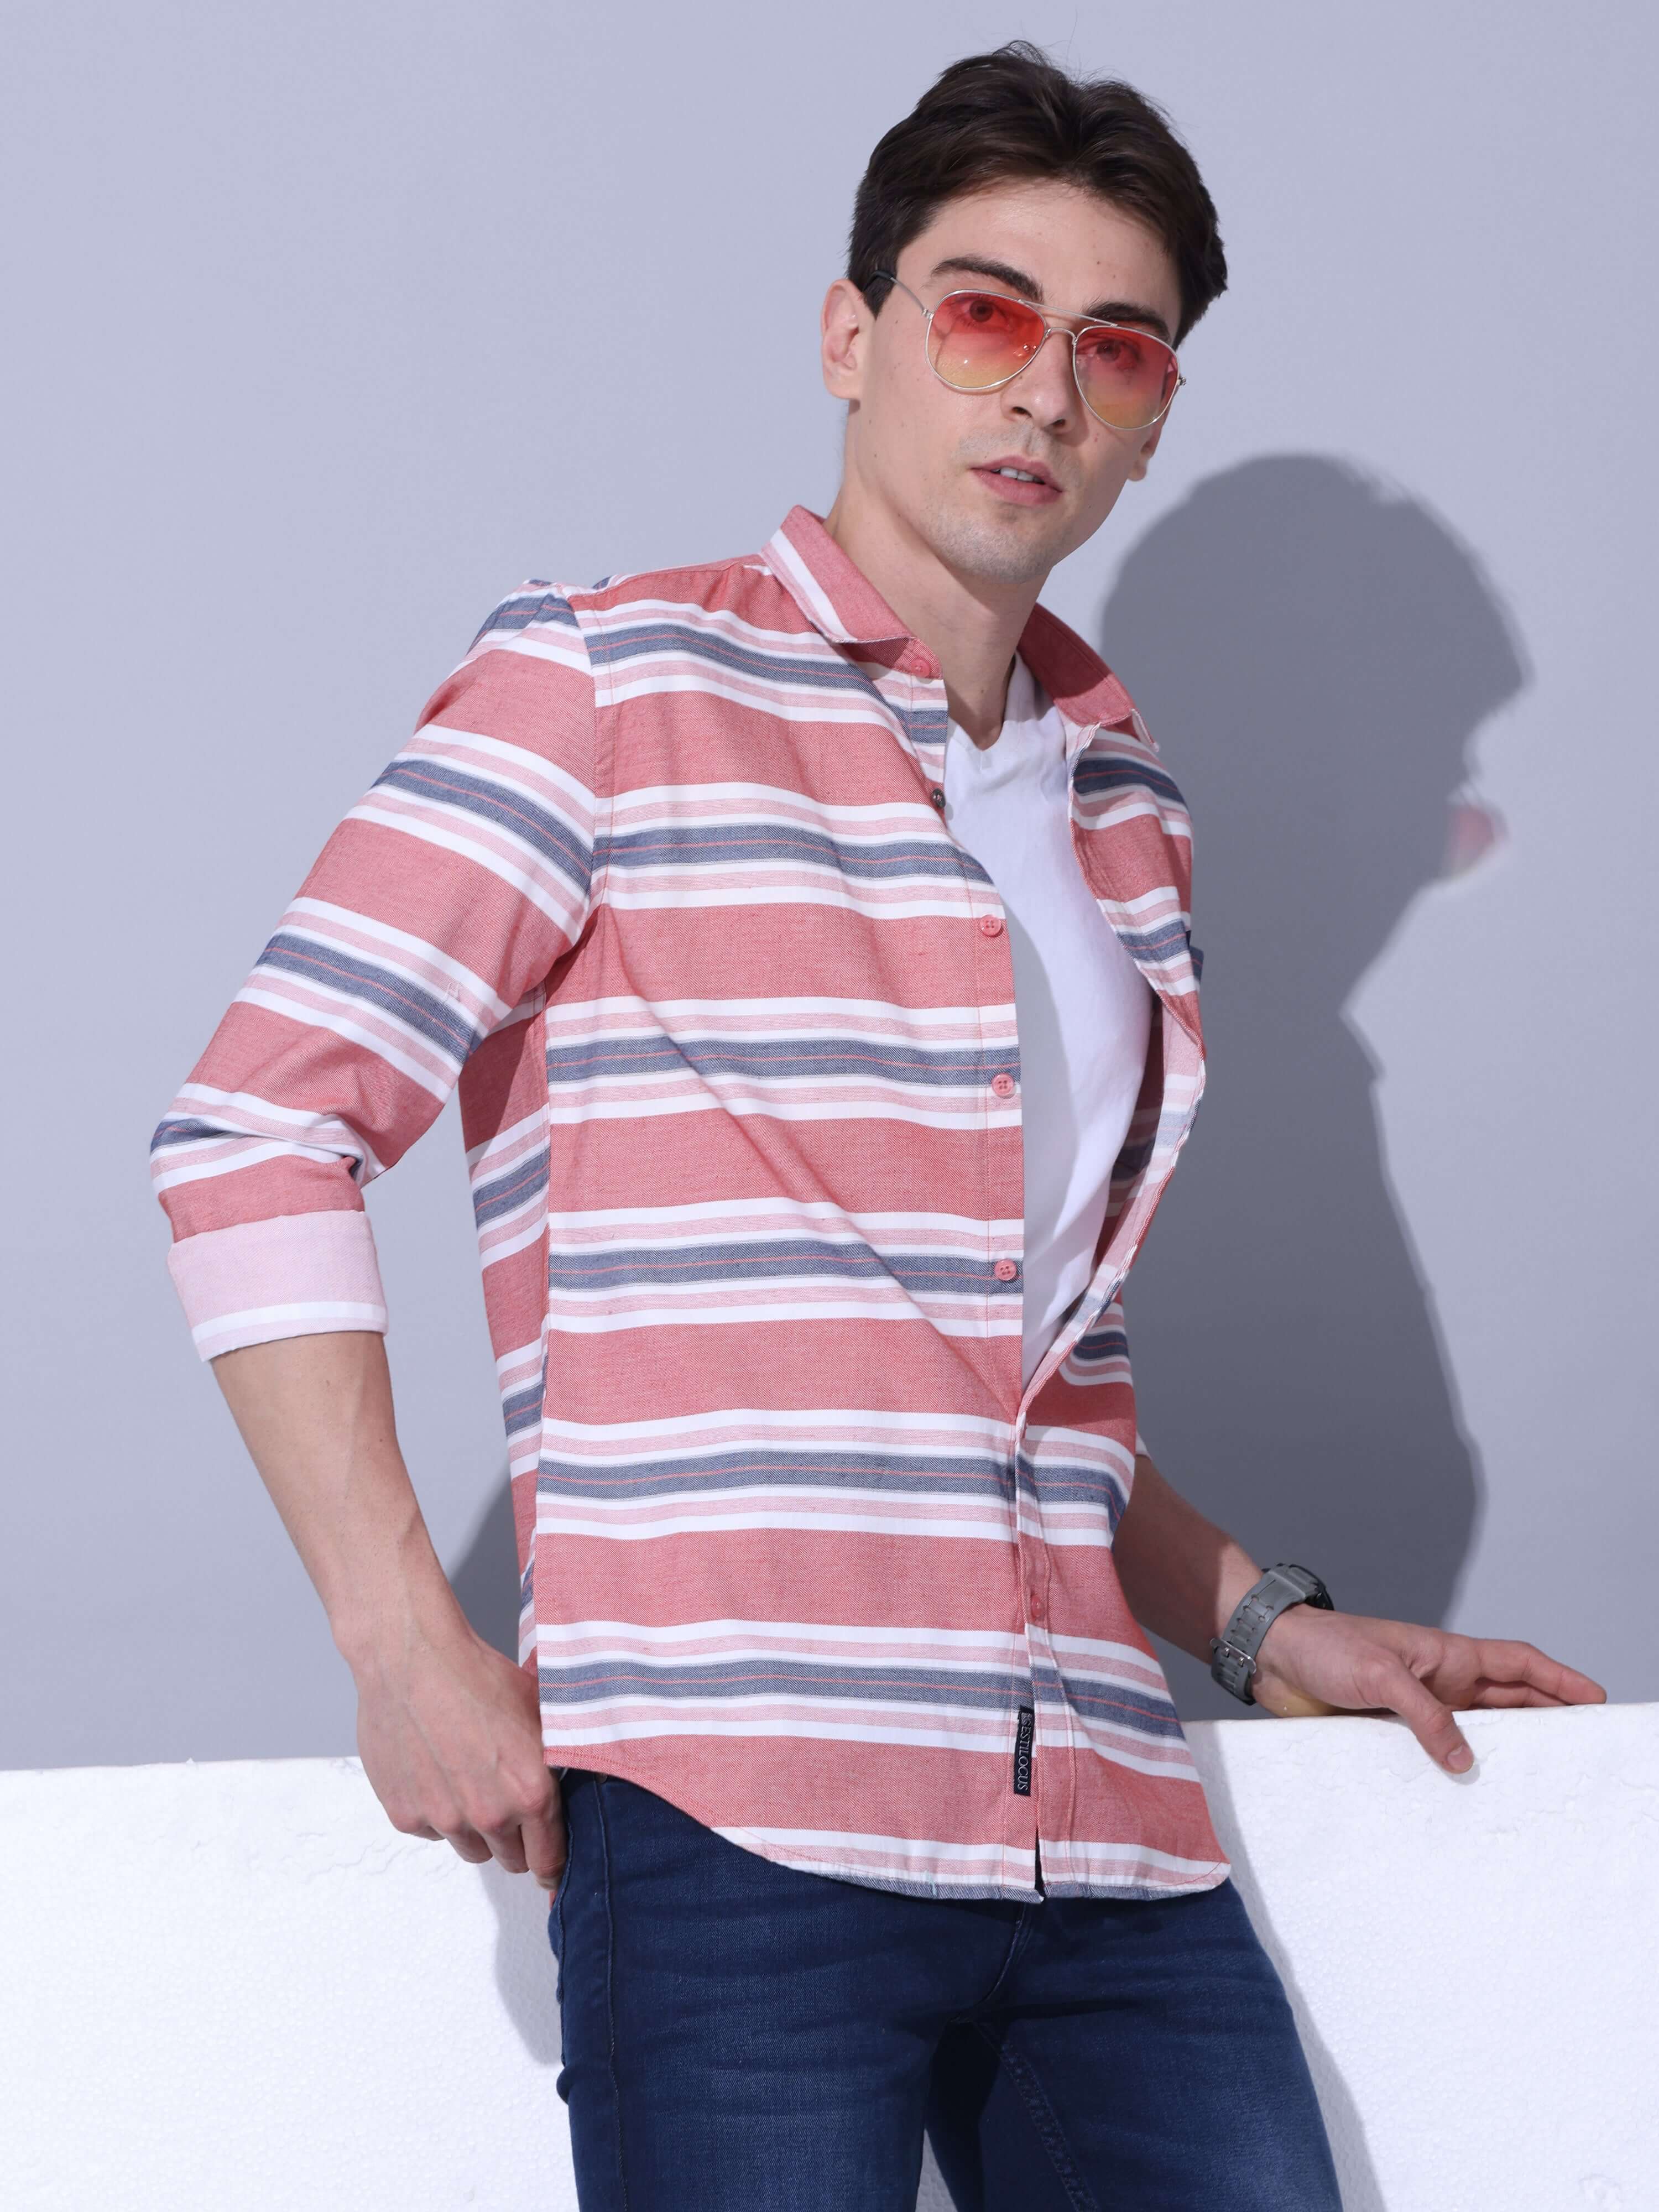 Red Stripe Casual Shirt shop online at Estilocus. • Geometric stripe print shirt with sleeve and single pocket• Cut and sew placket • Regular collar • Double button square cuff • Curved hemline • Finest quality sewing • Machine wash care • Suitable to wea